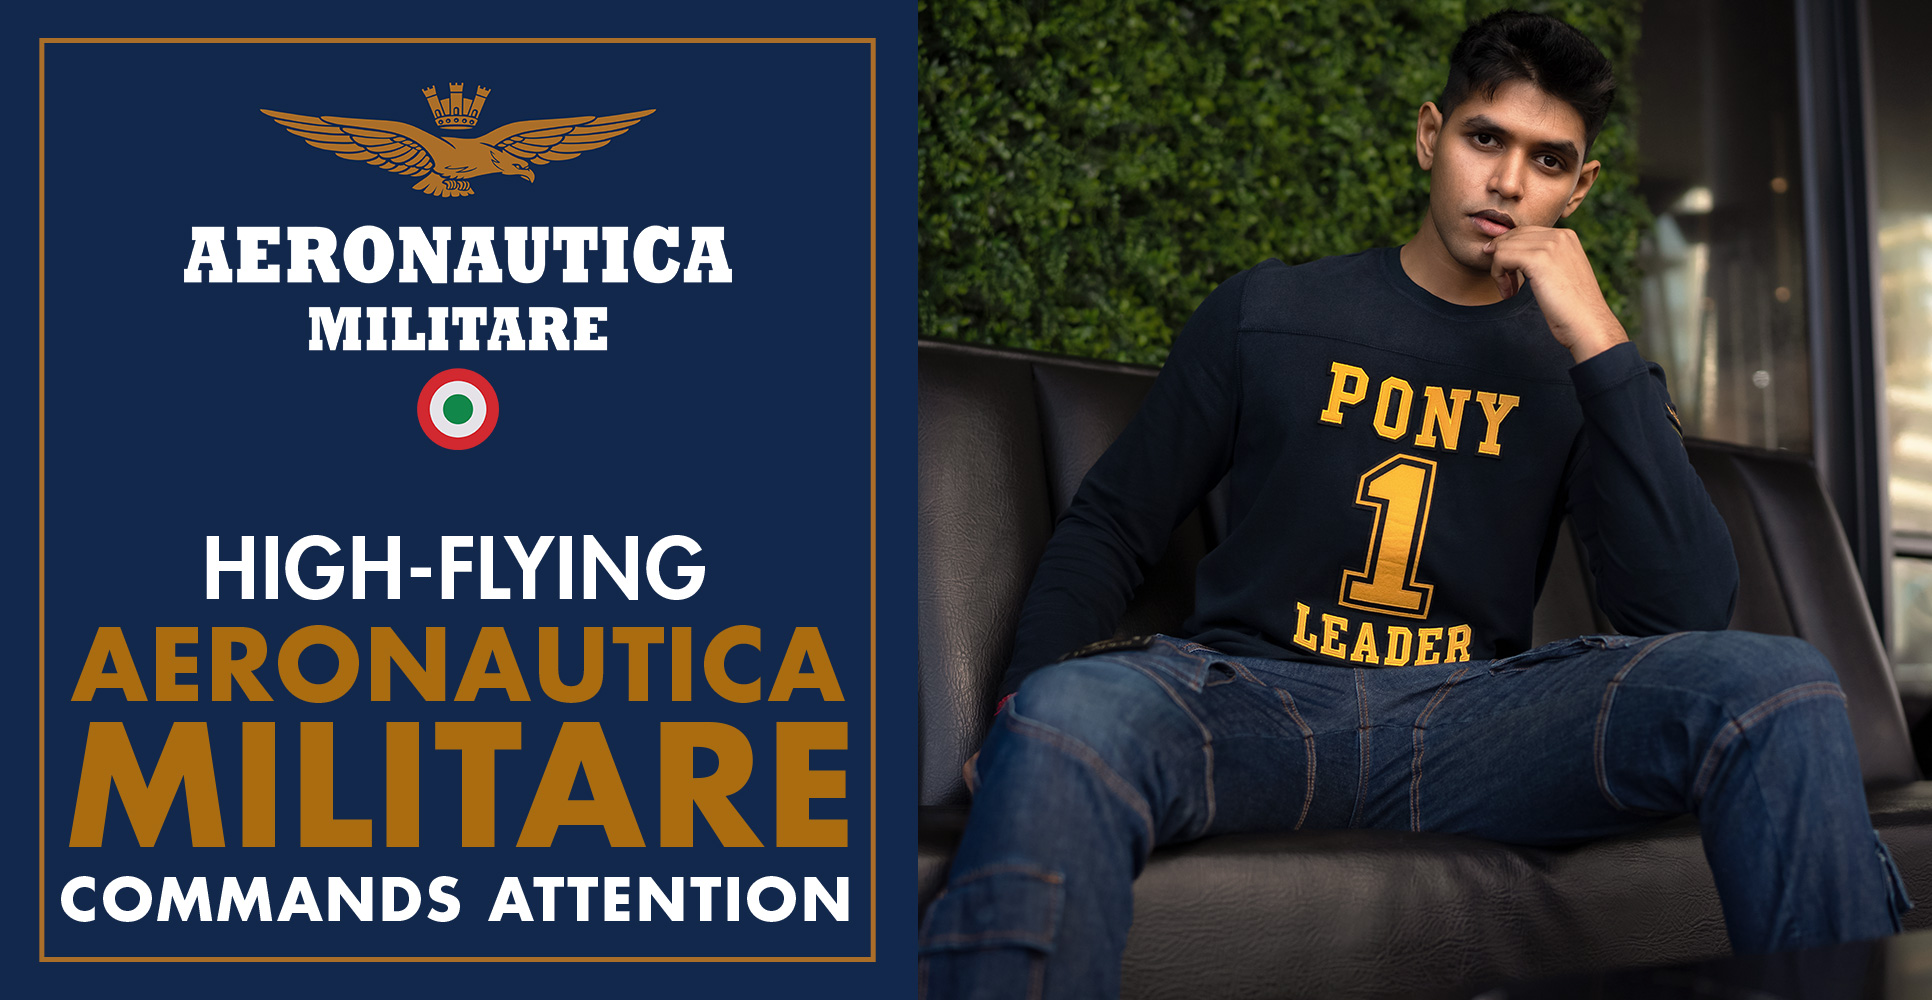 High-Flying Aeronautica Militare Commands Attention With Our Captivating Photoshoot